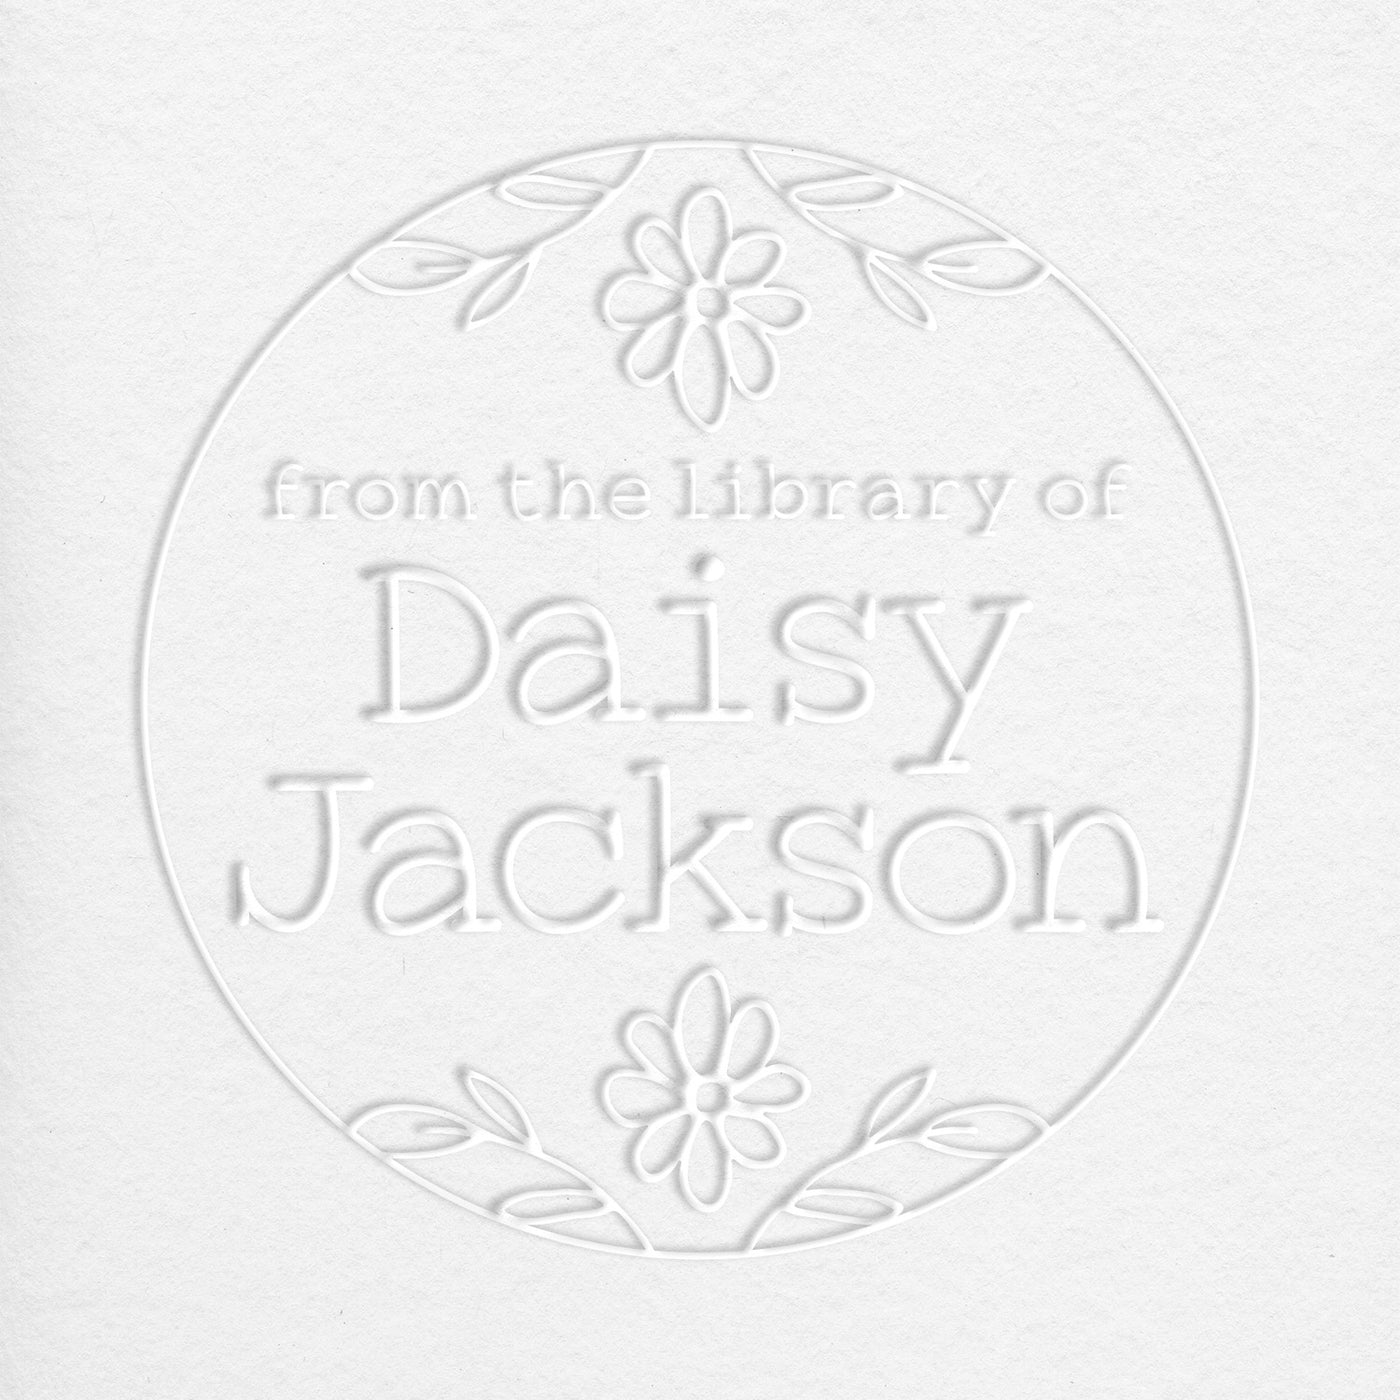 Personalized Embosser for Books. Custom Label Your Library Books